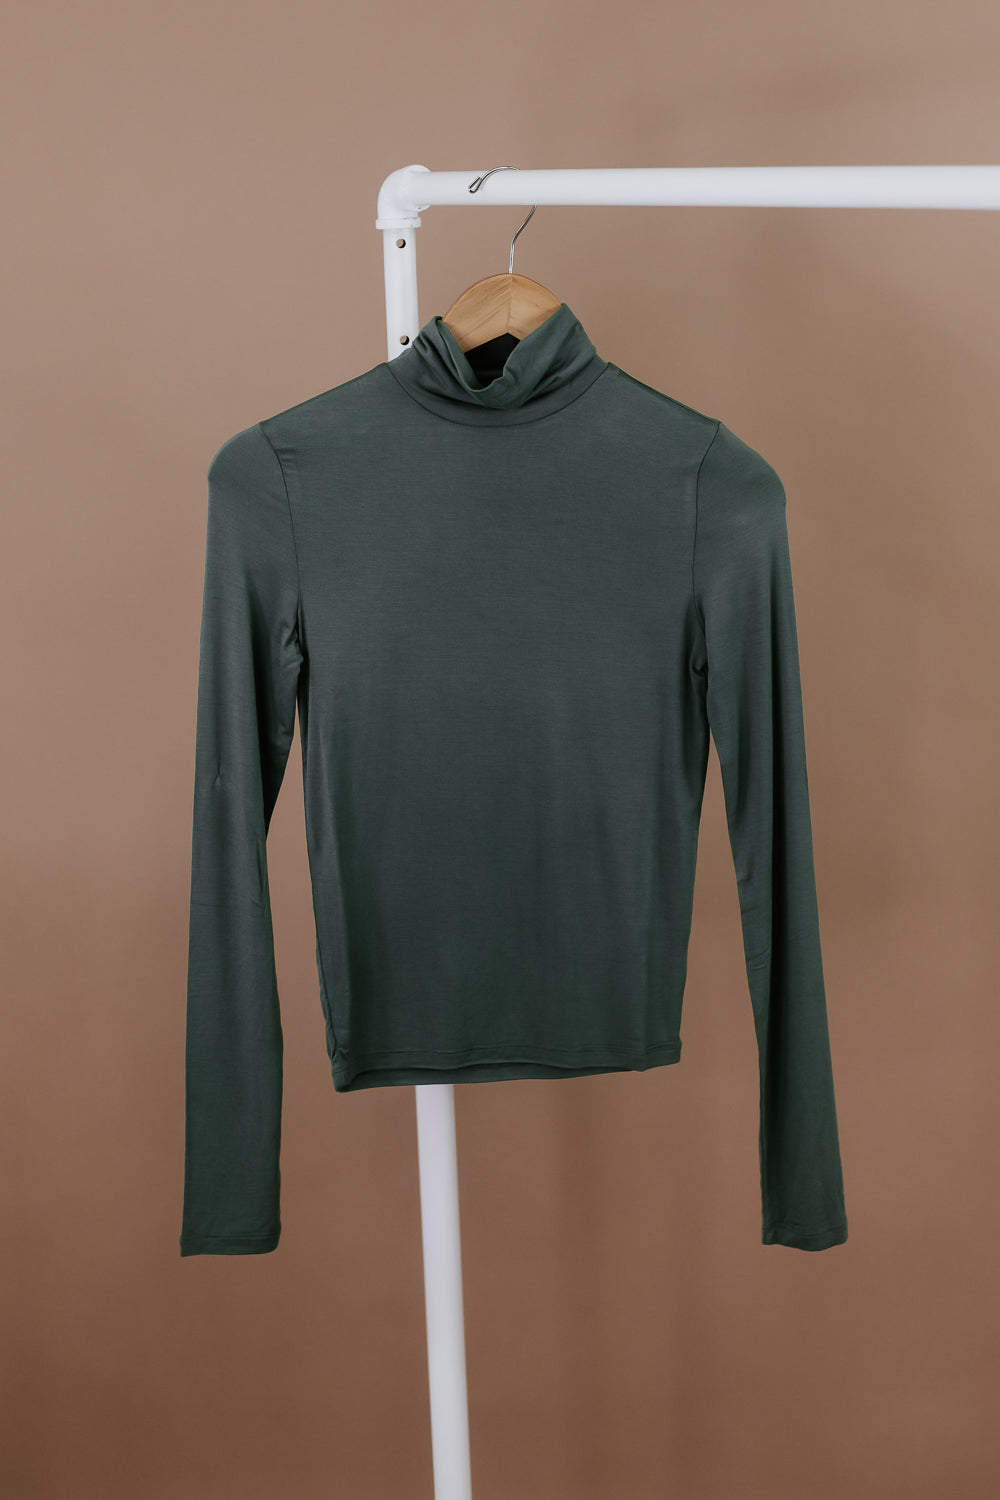 Extra Love Turtle Neck Top, Gray Green